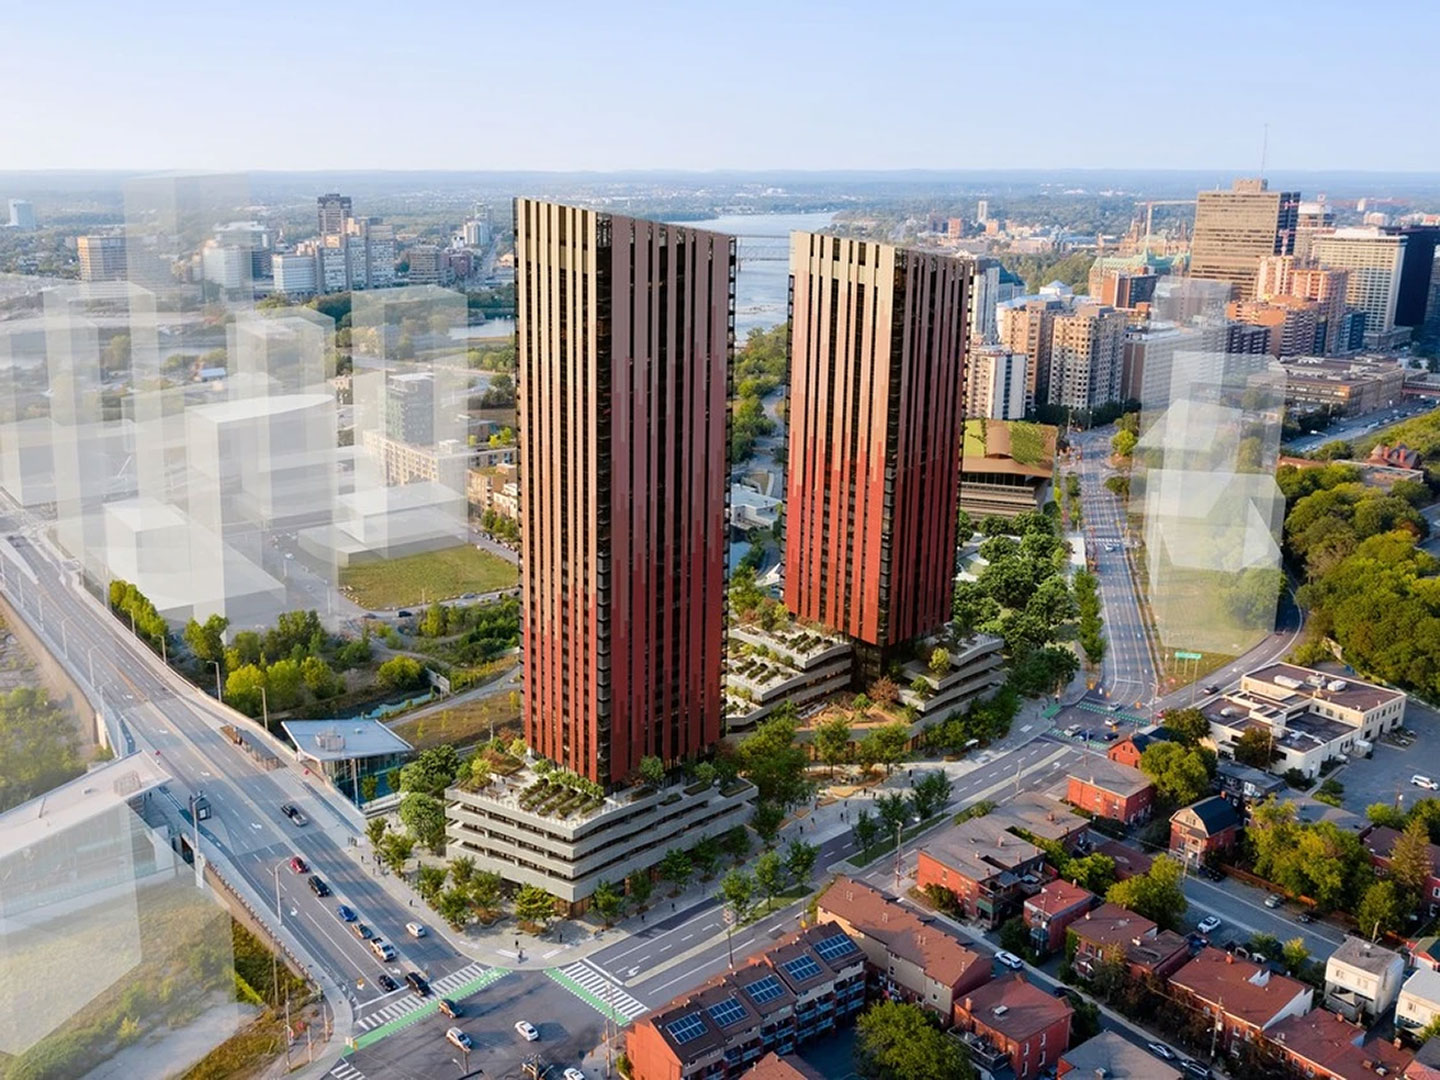 Arial view rendering of Dream Lebreton towers next to the new Ādisōke public library.